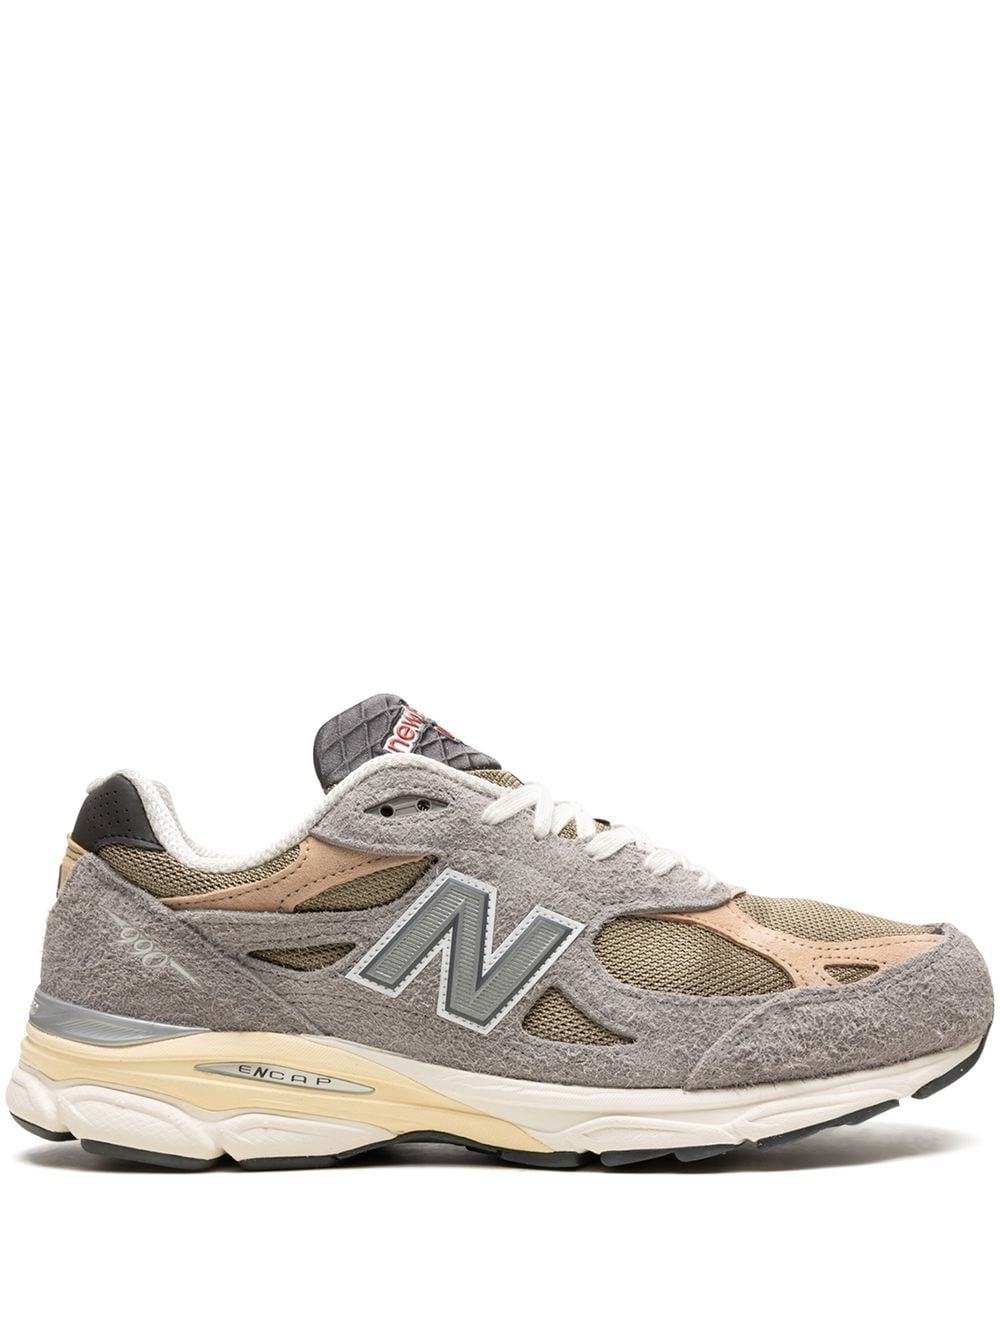 New Balance MADE in USA 990v3 sneakers - Grey